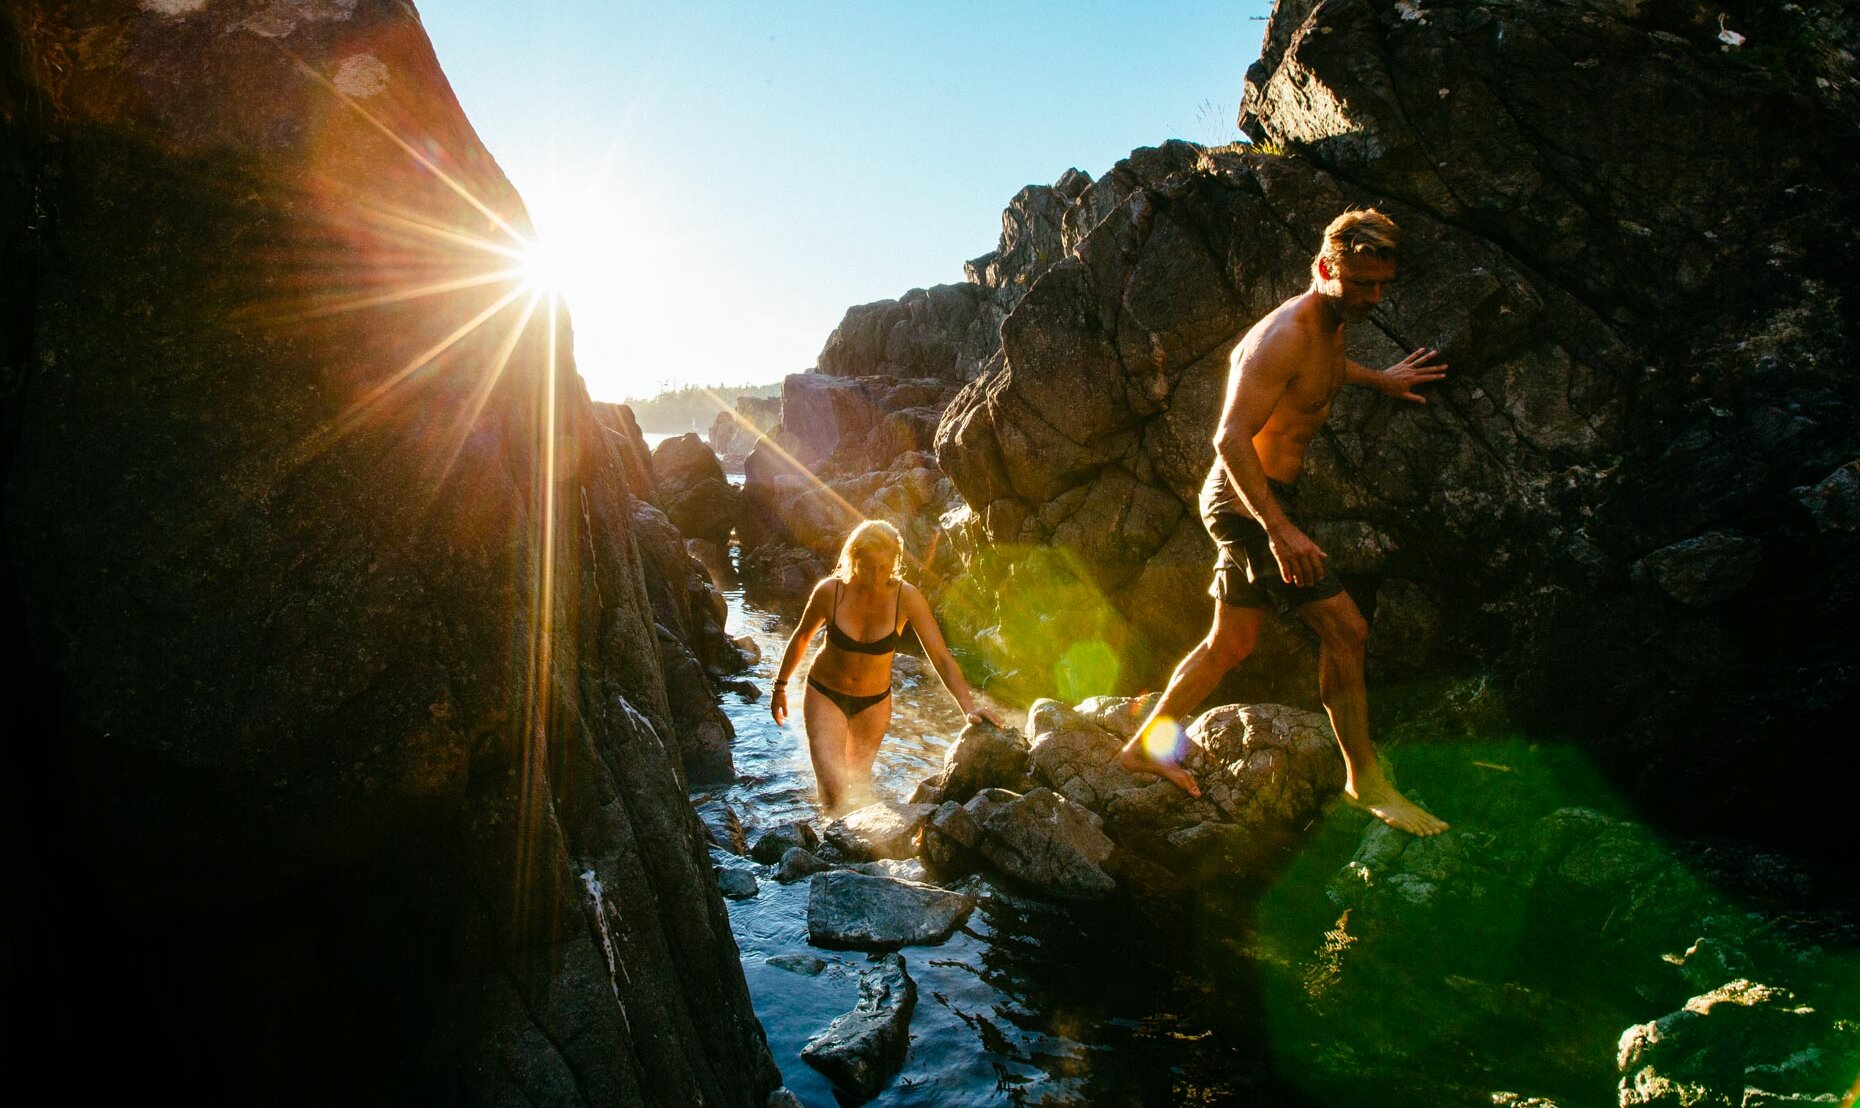 People climbing out of the hot springs rock pools